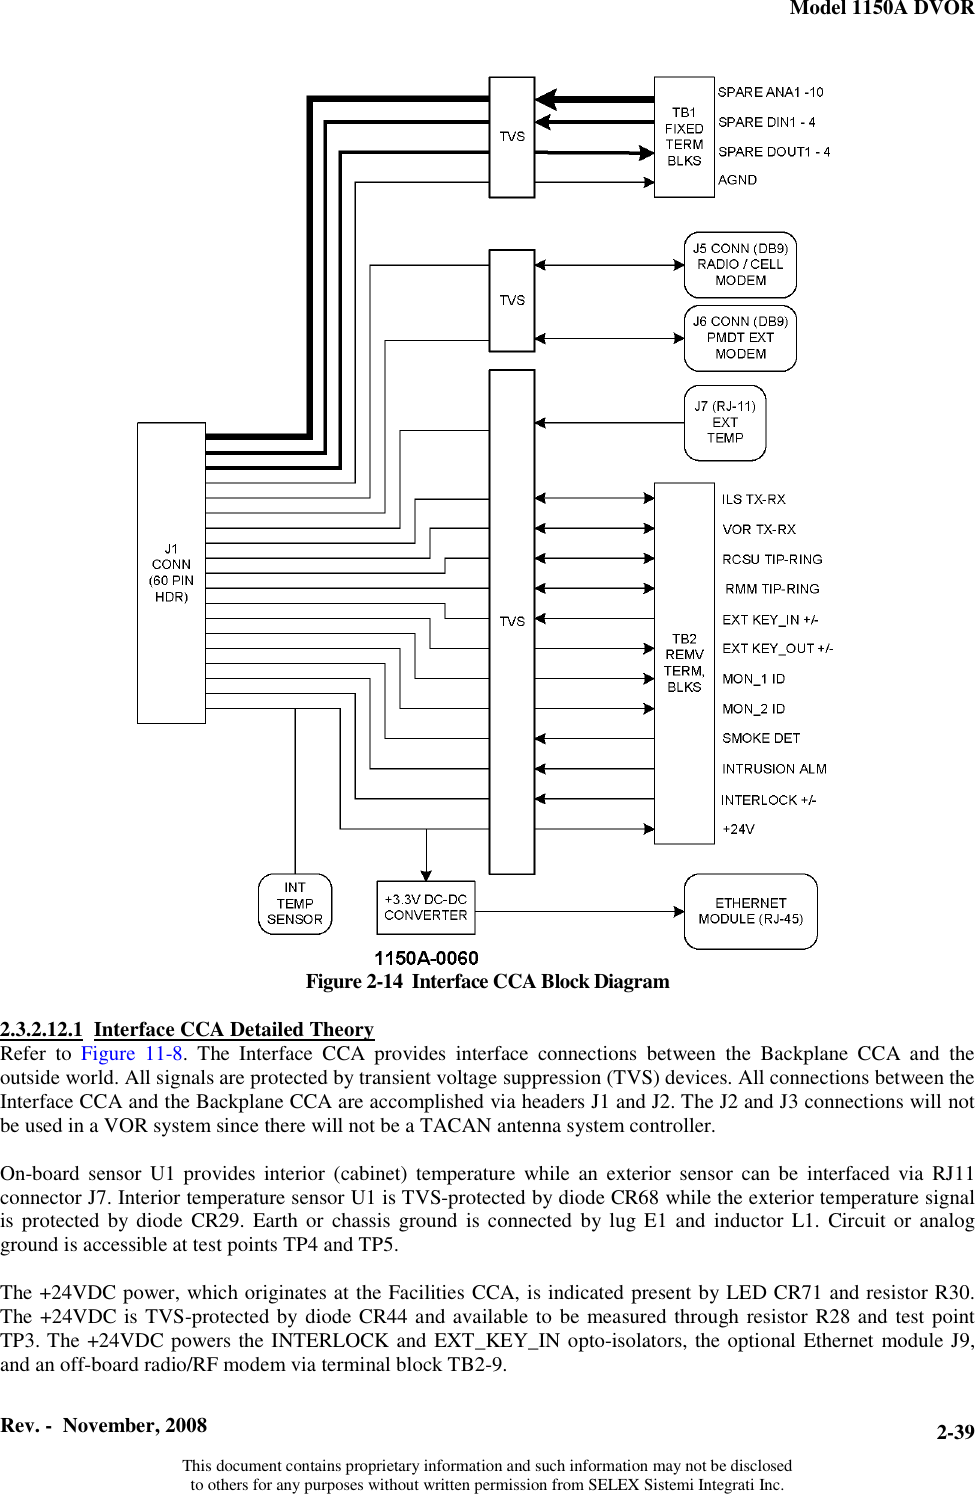 Model 1150A DVOR  Rev. -  November, 2008   This document contains proprietary information and such information may not be disclosed to others for any purposes without written permission from SELEX Sistemi Integrati Inc. 2-39Figure 2-14  Interface CCA Block Diagram  2.3.2.12.1 Interface CCA Detailed TheoryRefer to Figure 11-8.The Interface CCA provides interface connections between the Backplane CCA and the outside world. All signals are protected by transient voltage suppression (TVS) devices. All connections between the Interface CCA and the Backplane CCA are accomplished via headers J1 and J2. The J2 and J3 connections will not be used in a VOR system since there will not be a TACAN antenna system controller.  On-board sensor U1 provides interior (cabinet) temperature while an exterior sensor can be interfaced via RJ11 connector J7. Interior temperature sensor U1 is TVS-protected by diode CR68 while the exterior temperature signal is protected by diode CR29. Earth or chassis ground is connected by lug E1 and inductor L1. Circuit or analog ground is accessible at test points TP4 and TP5.  The +24VDC power, which originates at the Facilities CCA, is indicated present by LED CR71 and resistor R30. The +24VDC is TVS-protected by diode CR44 and available to be measured through resistor R28 and test point TP3. The +24VDC powers the INTERLOCK and EXT_KEY_IN opto-isolators, the optional Ethernet module J9, and an off-board radio/RF modem via terminal block TB2-9. 